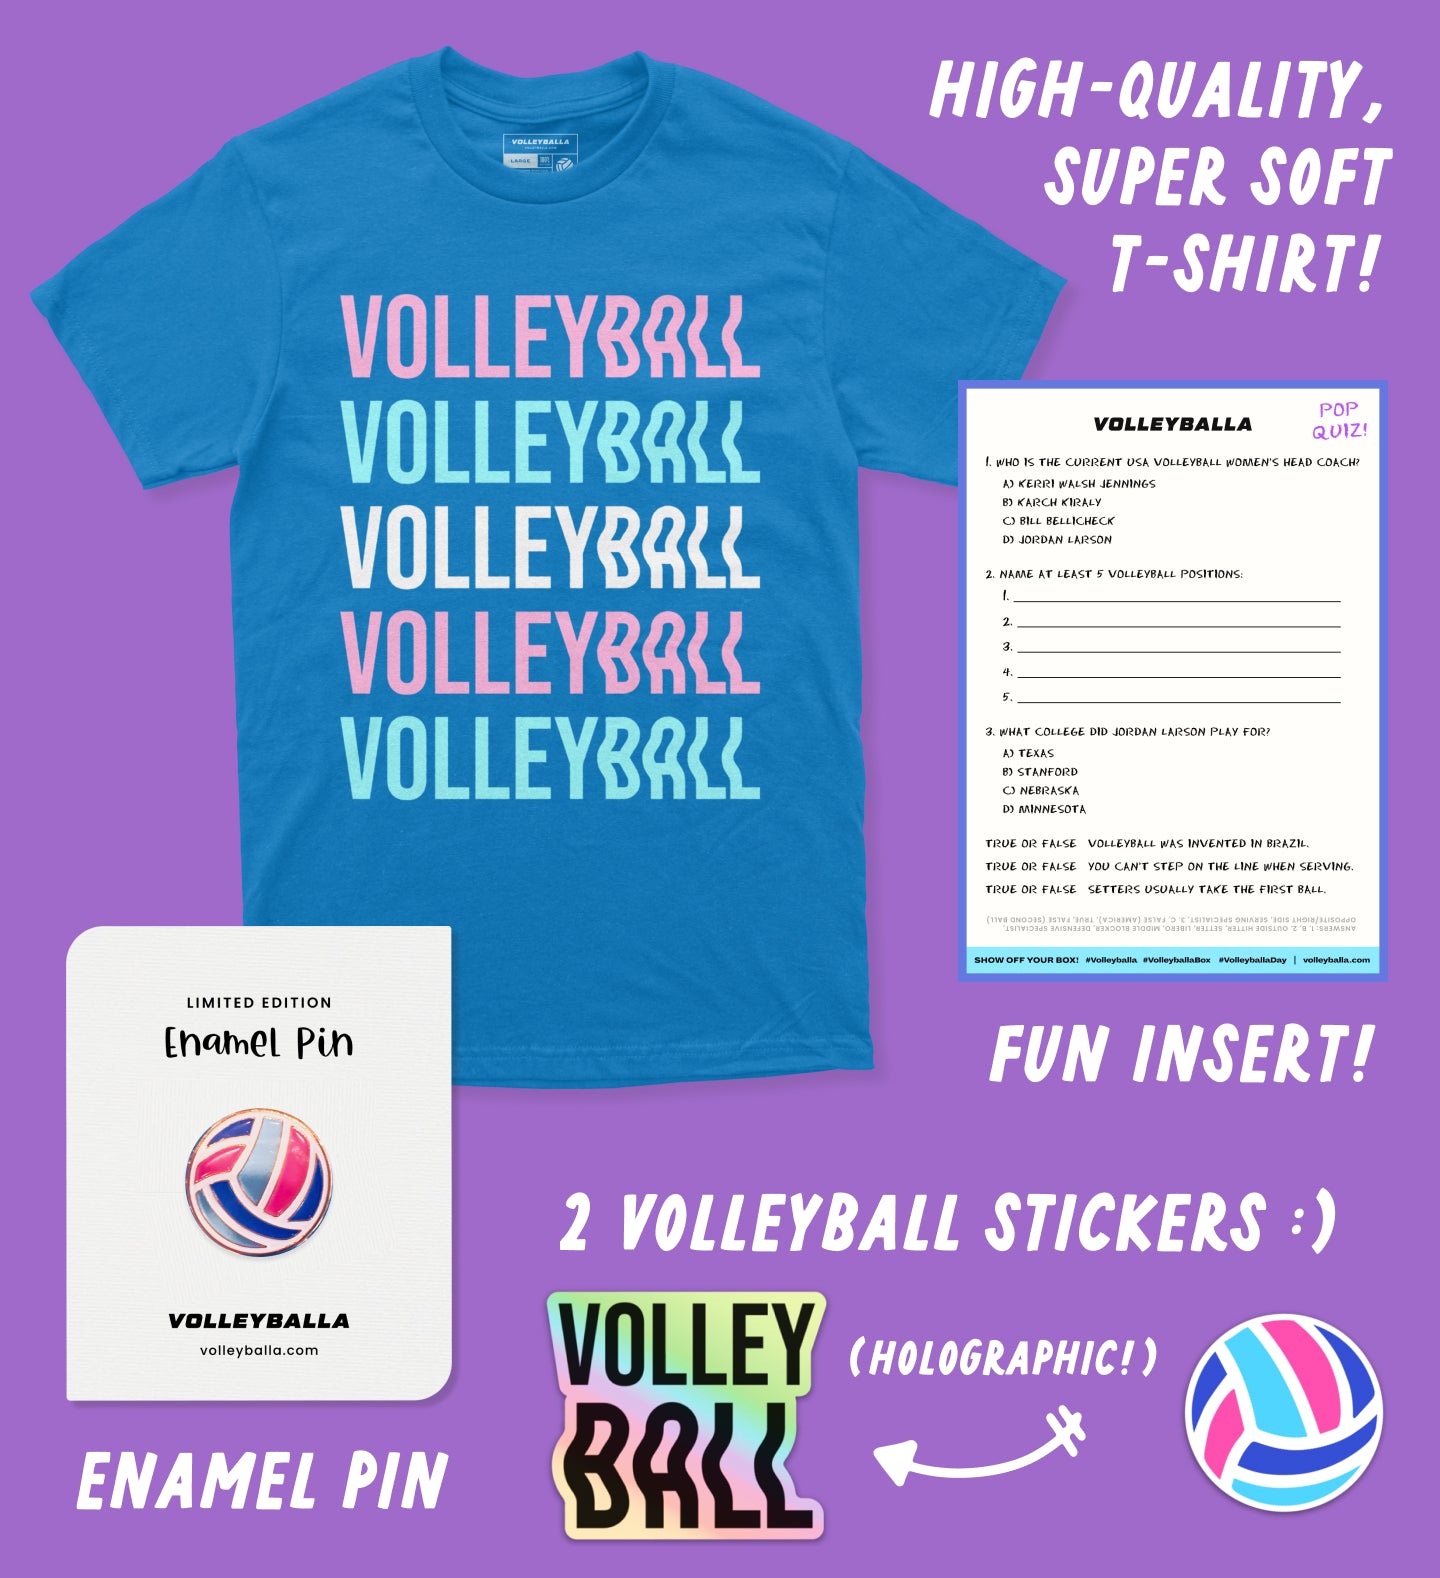 Make Volleyball Waves - Volleyball Gift Box